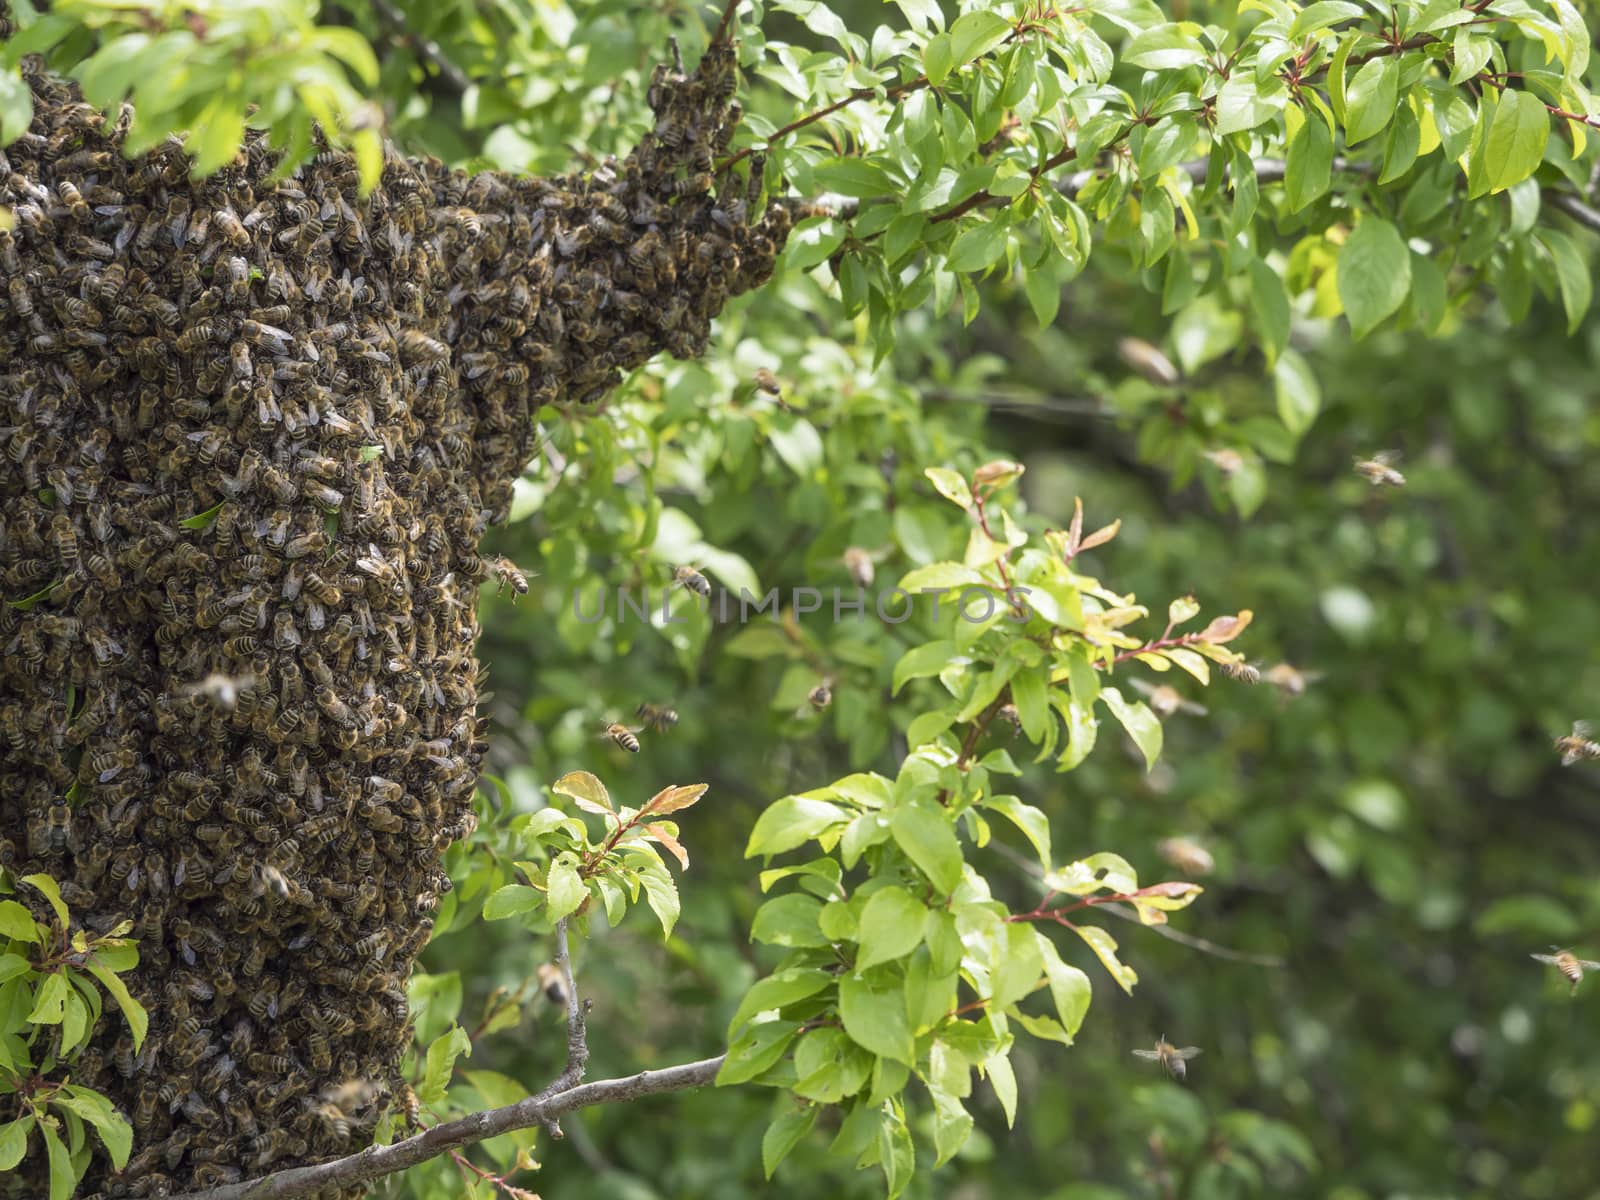 close up wild hive with cluster or swarm of bees on tree branch.